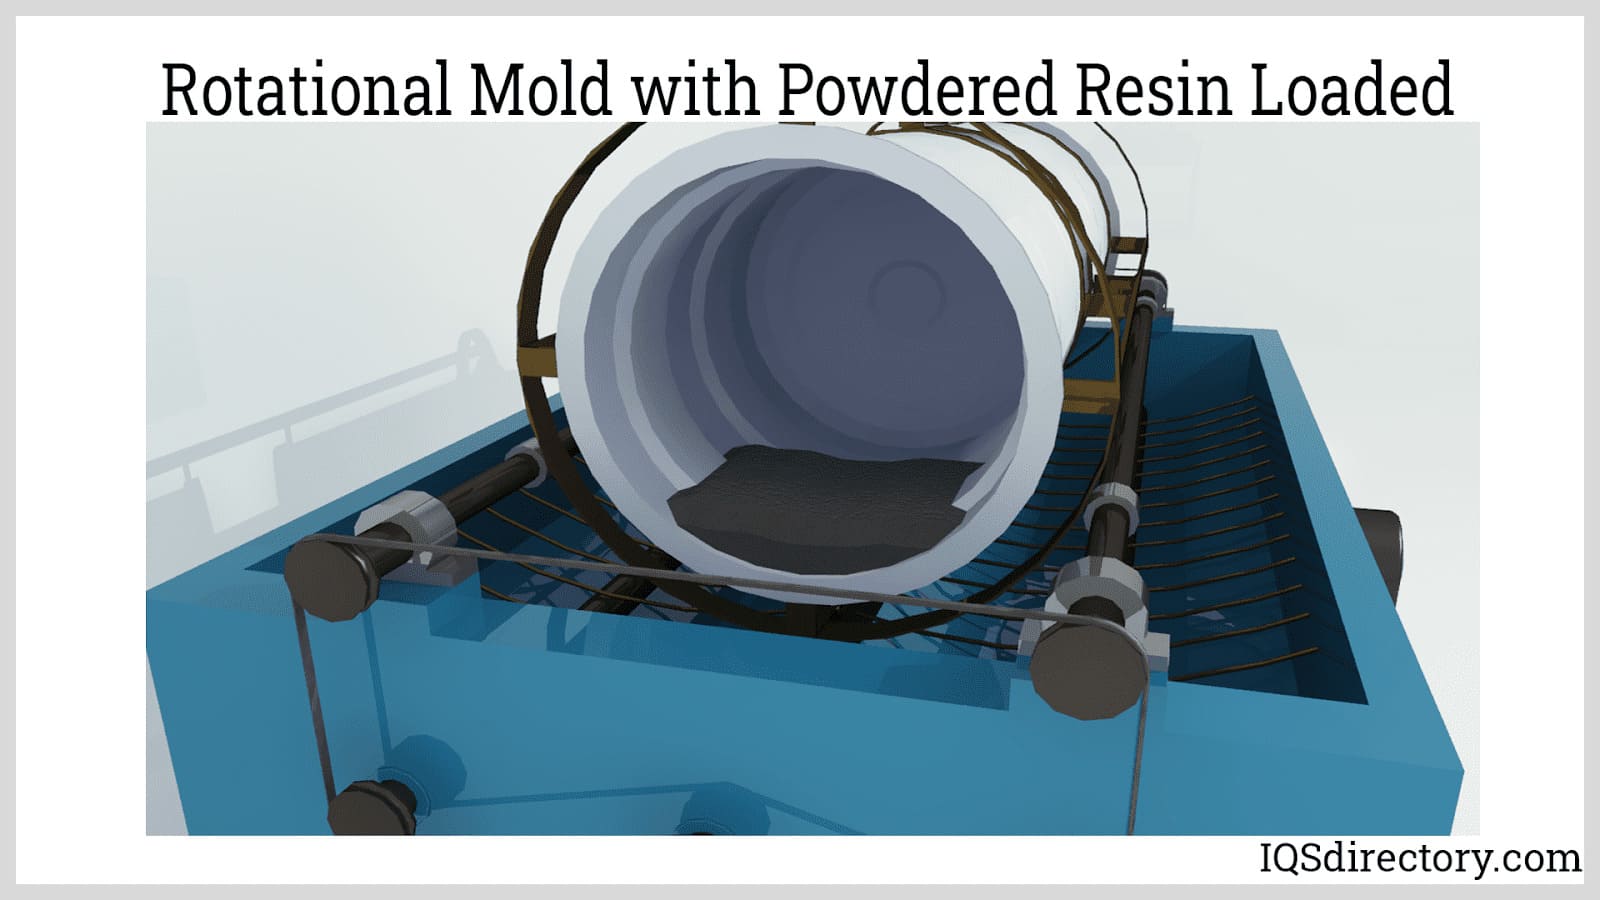 Rotational Mold with Powdered Resin Loaded